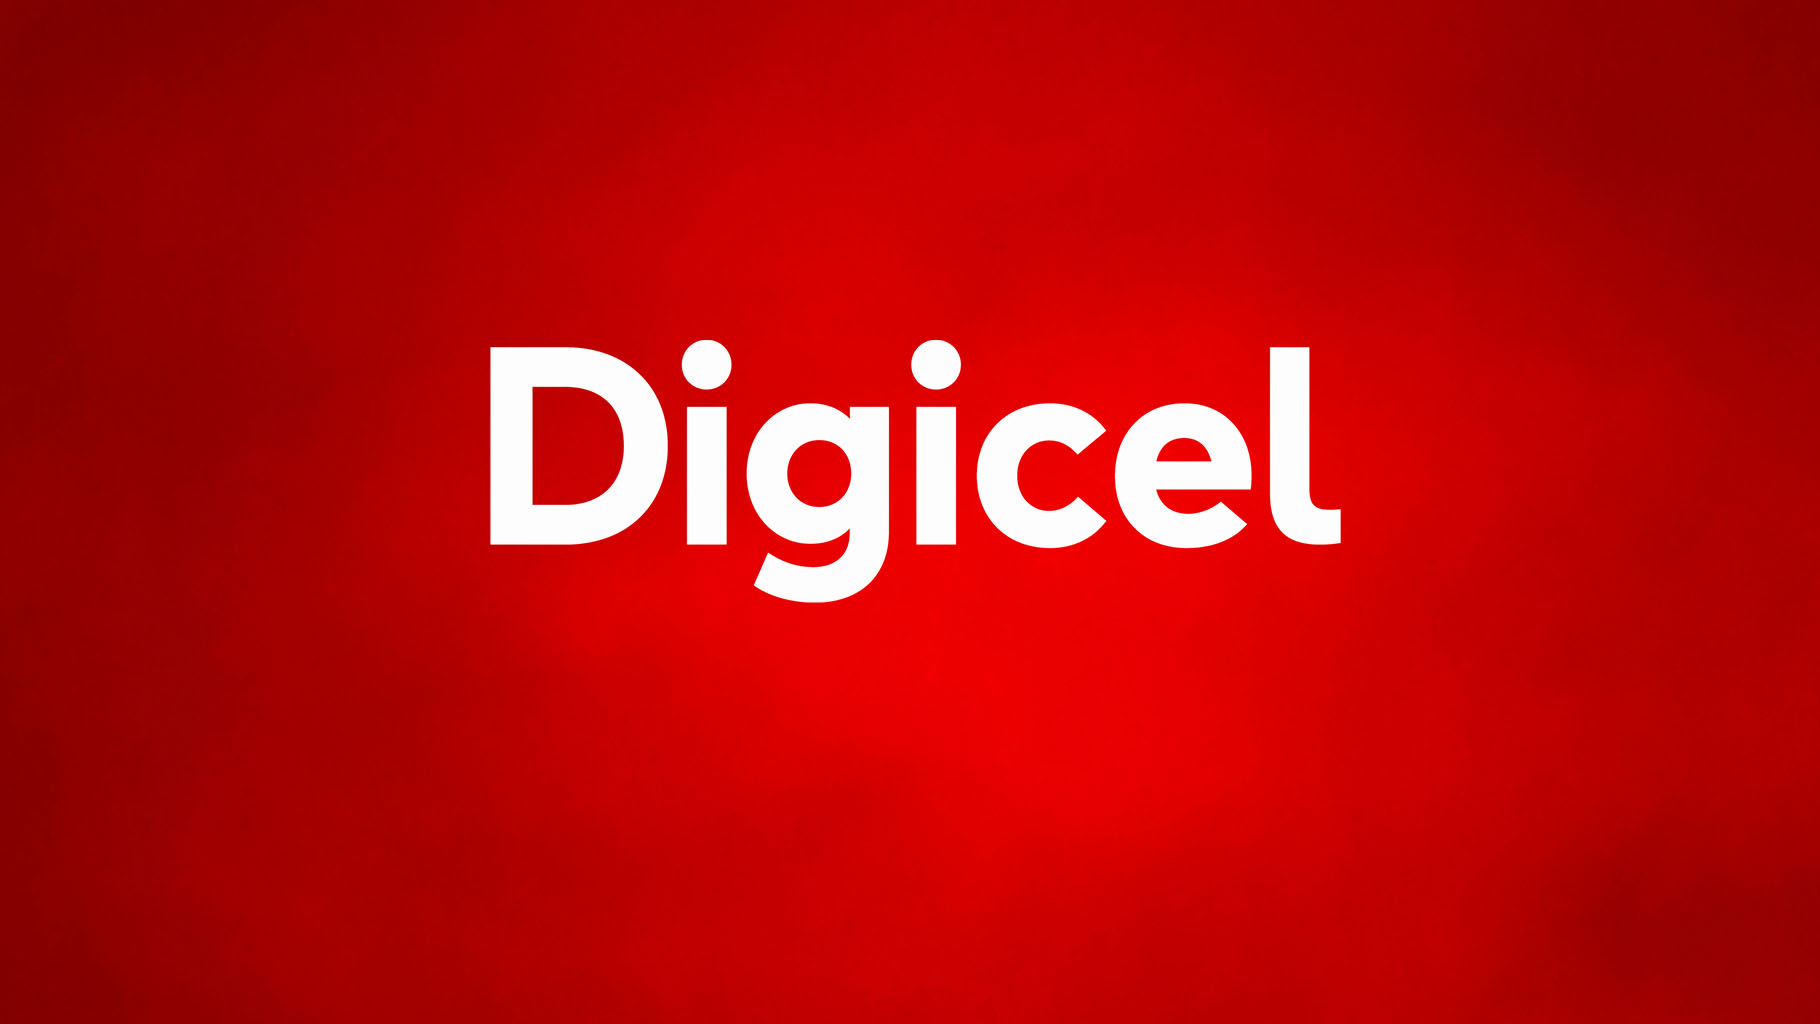 Digicel employee’s relative tests positive for COVID. Friars Hill Road outlet closed